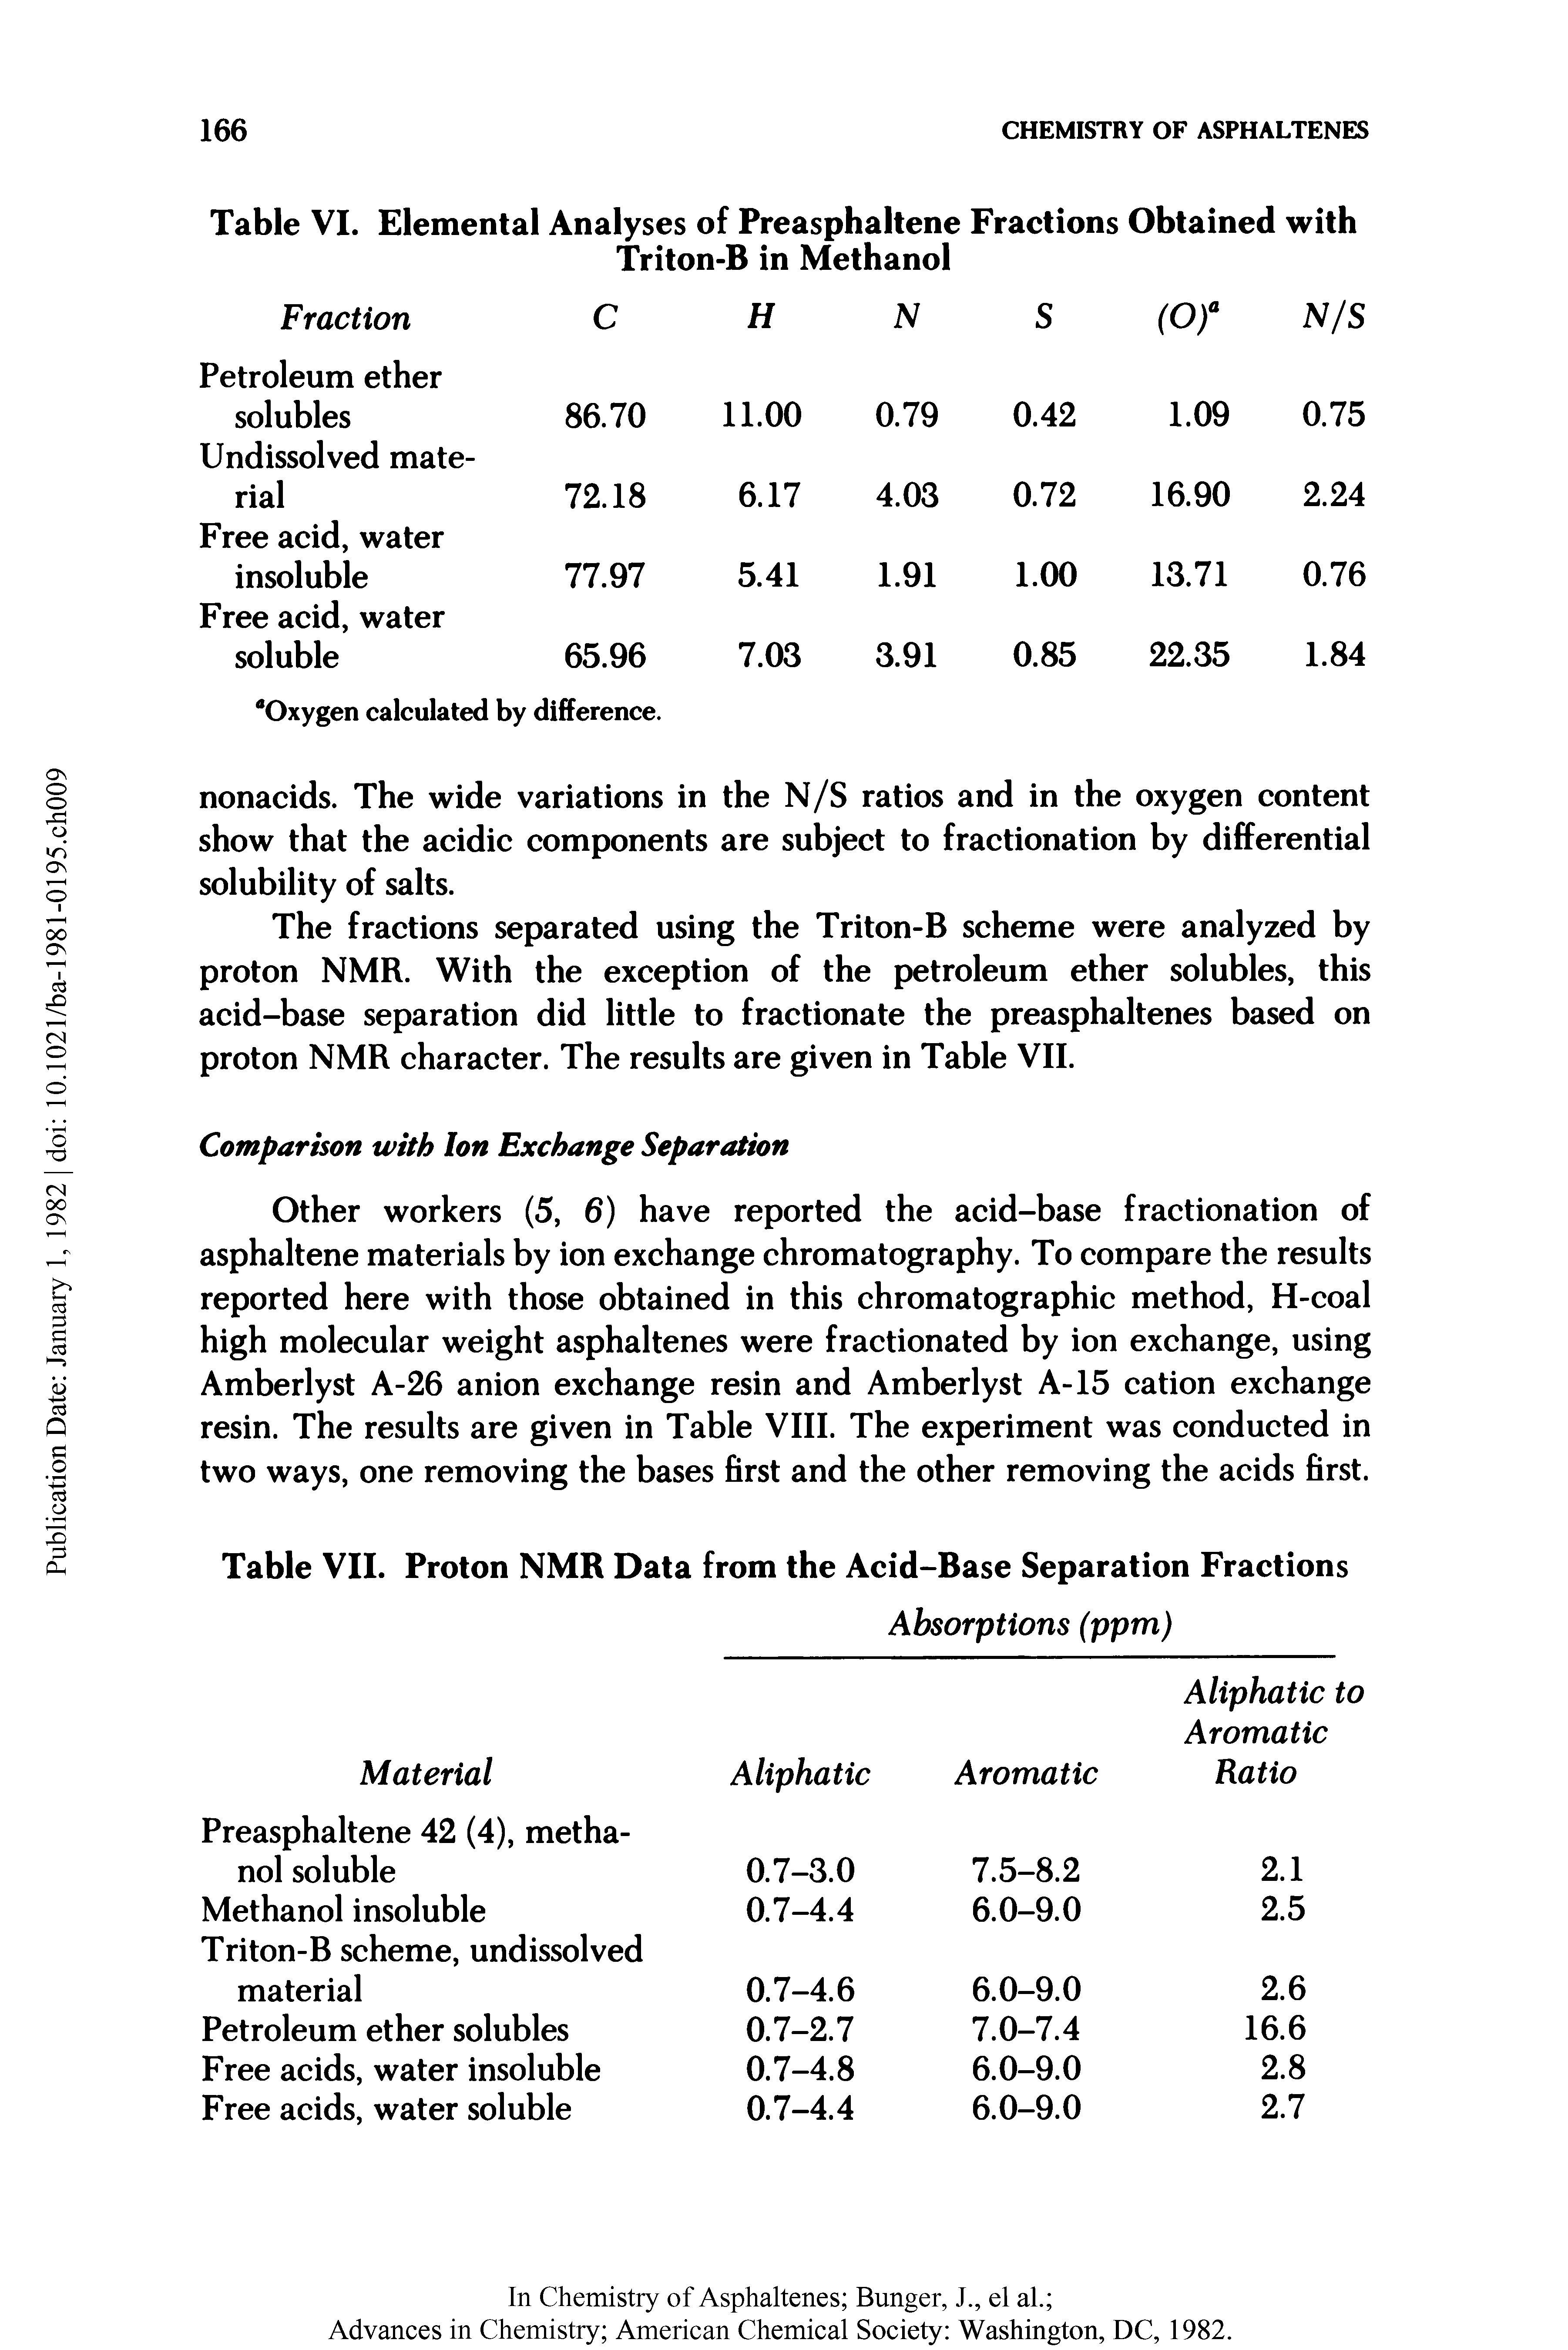 Table VII. Proton NMR Data from the Acid-Base Separation Fractions...